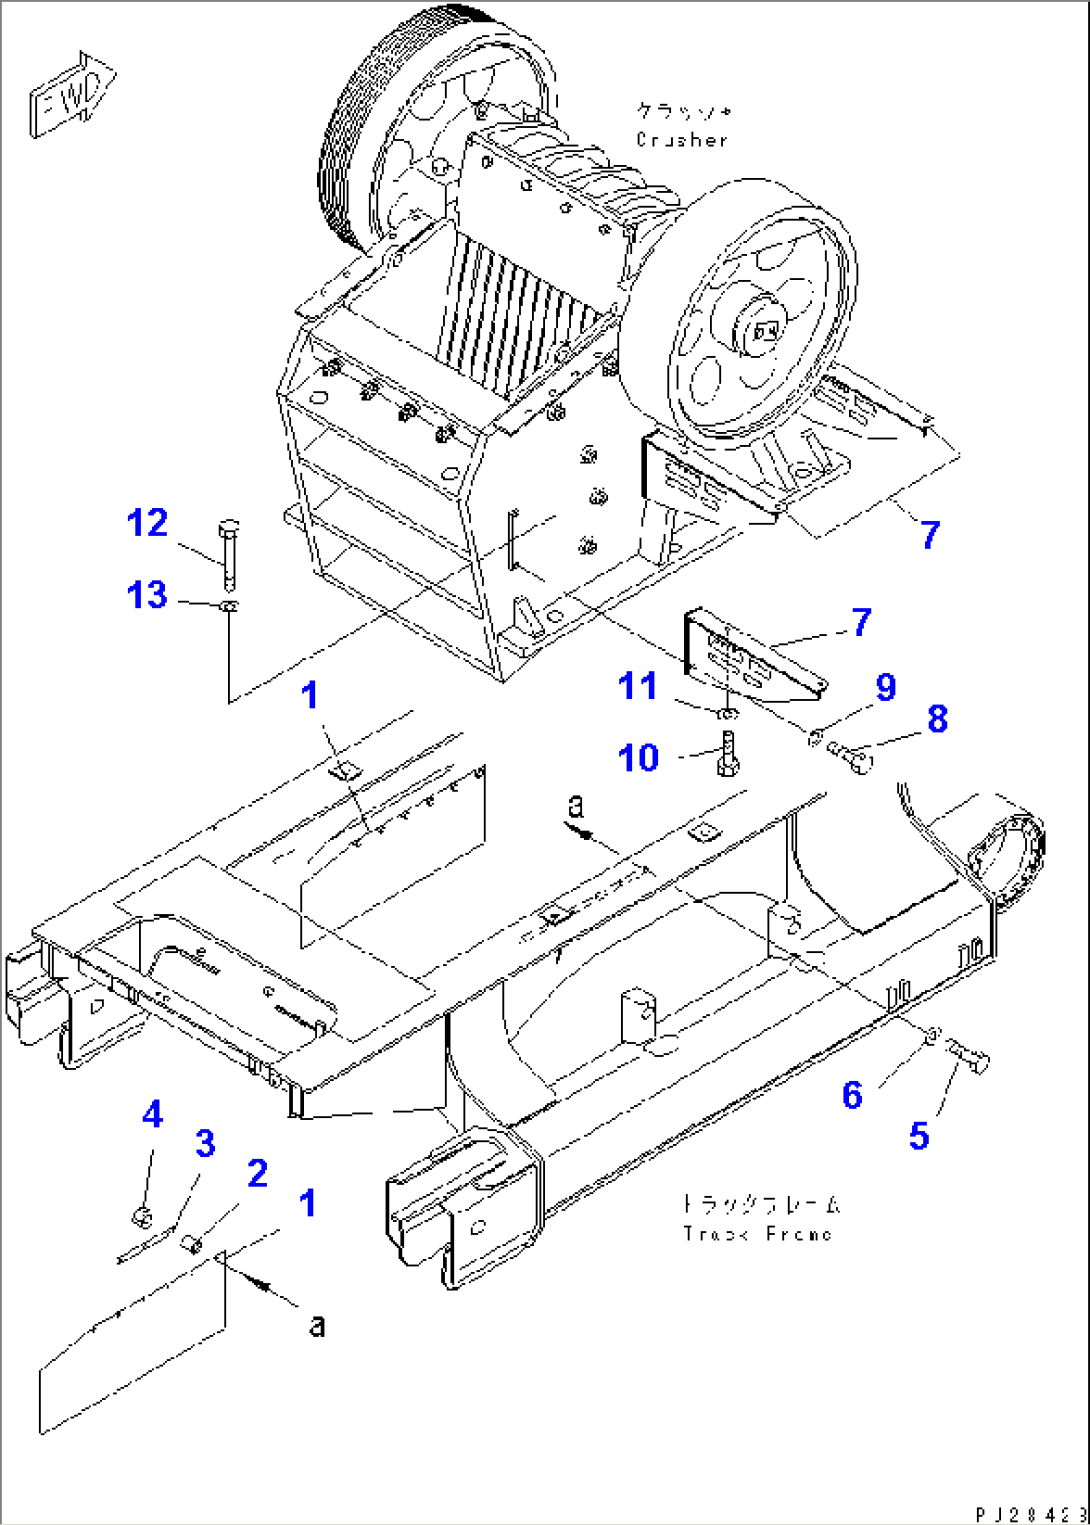 CRUSHER (CRUSHER MOUNTING PARTS AND SIDE COVER)(#1501-)